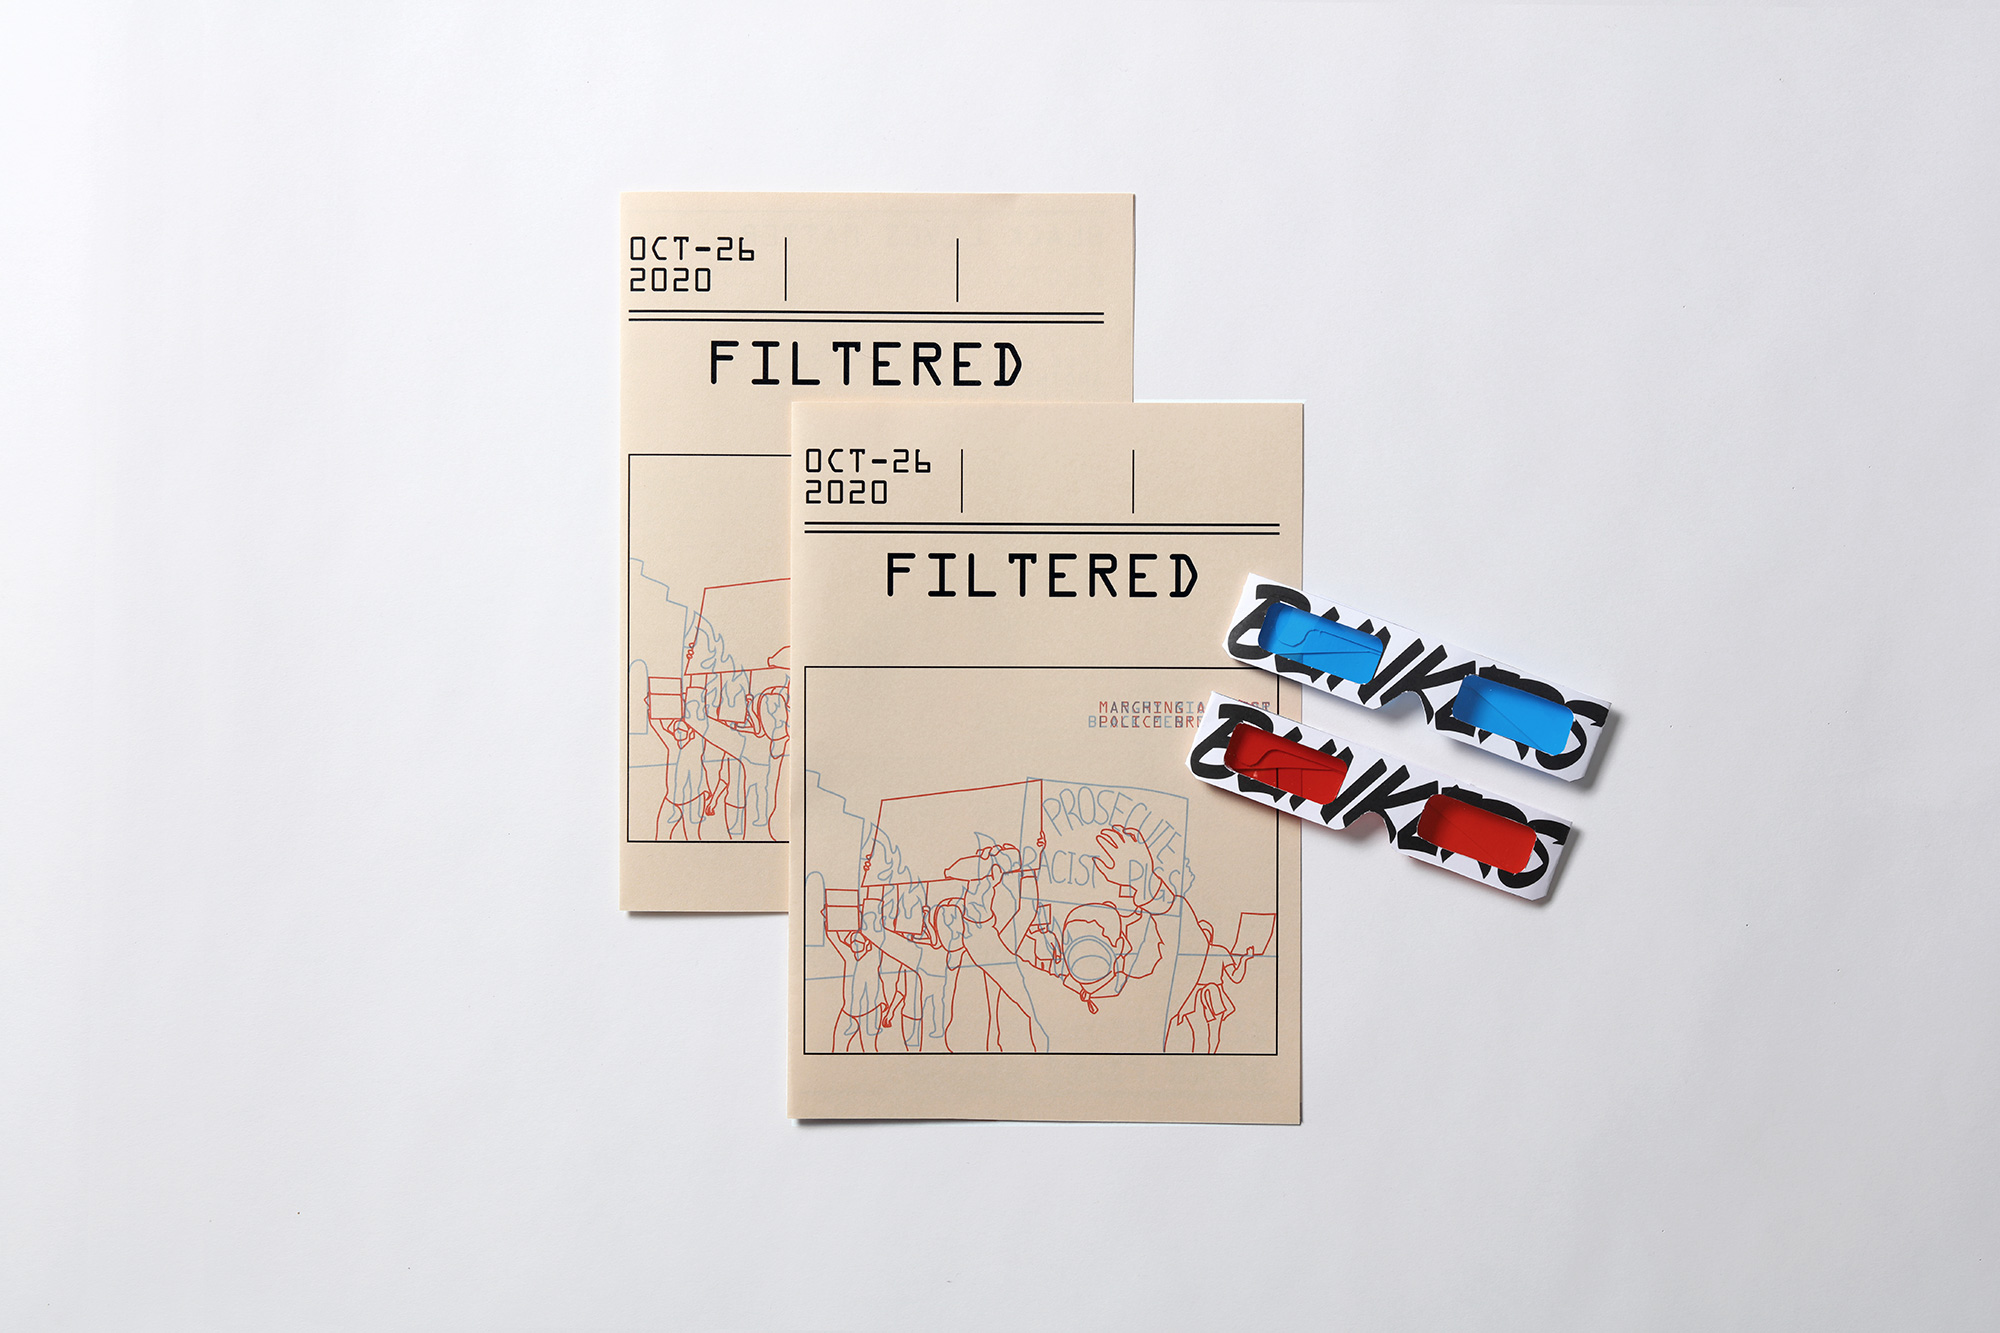 A cover of a flyer with a drawing representing a crowd and some text with the title: FILTERED. There are also a pair of blue and red tinted cardboard glasses with the word BLINKED on them.